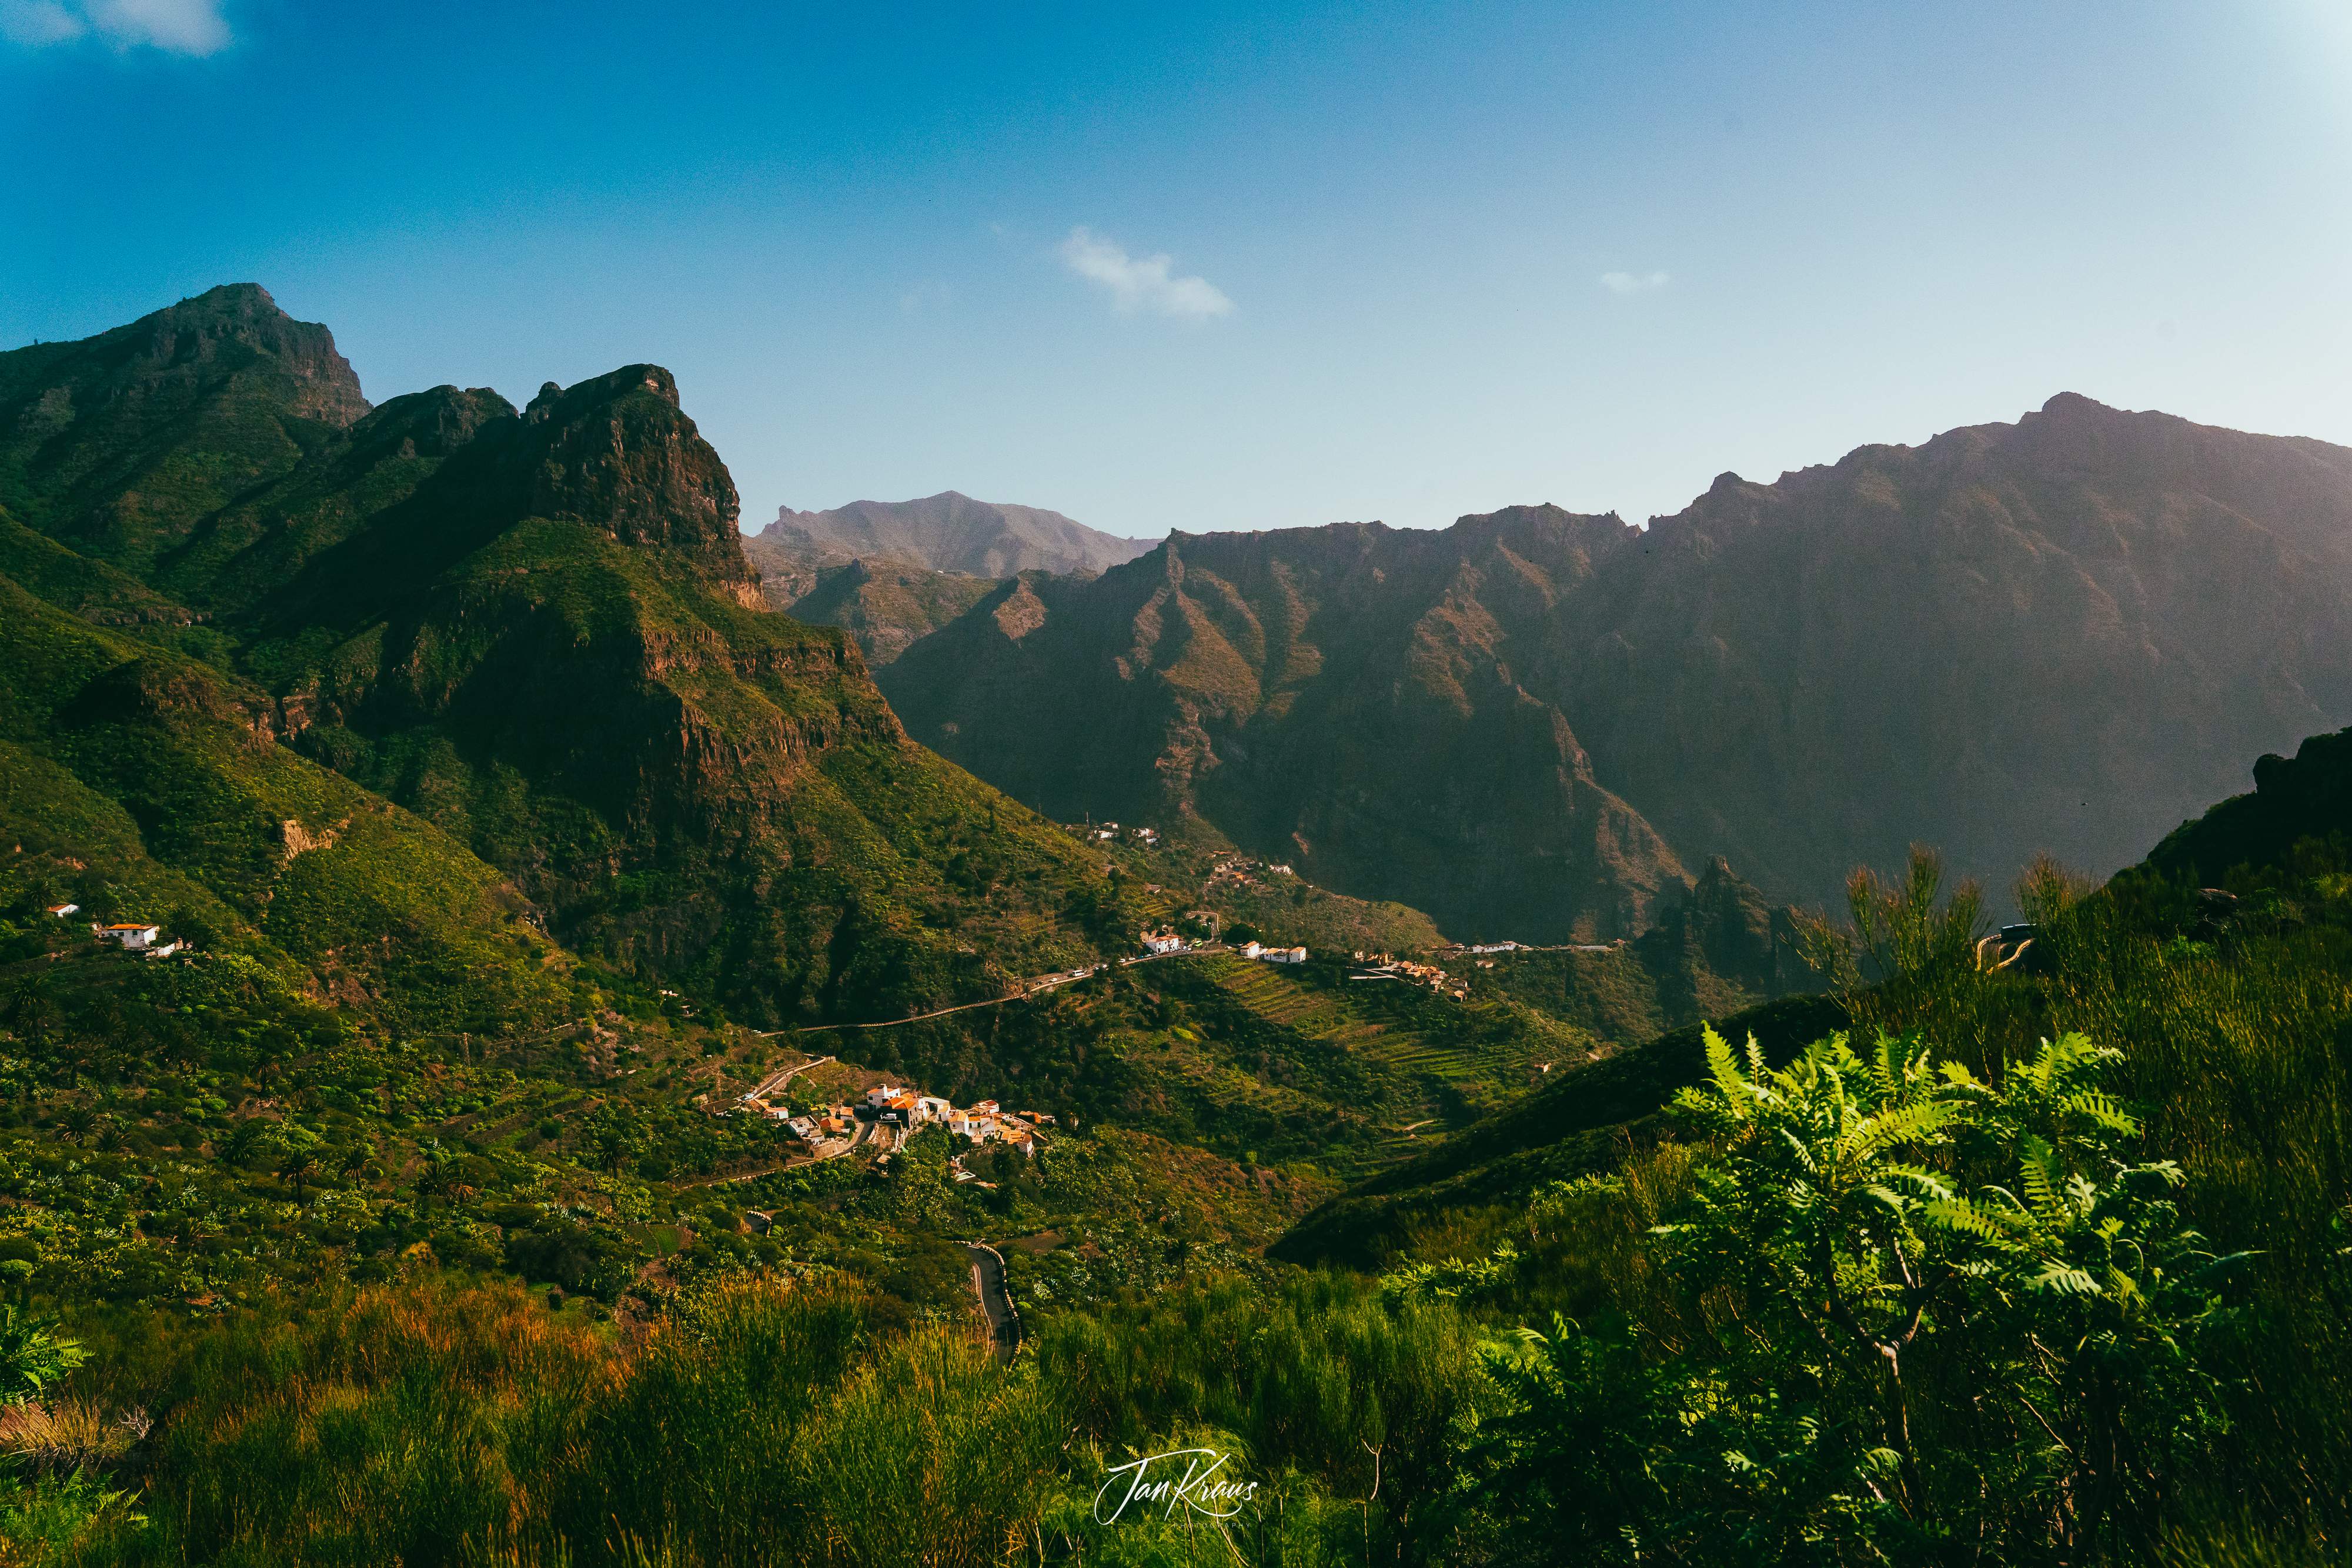 A view down the mountains above Masca village, Tenerife, Canary Islands, Spain